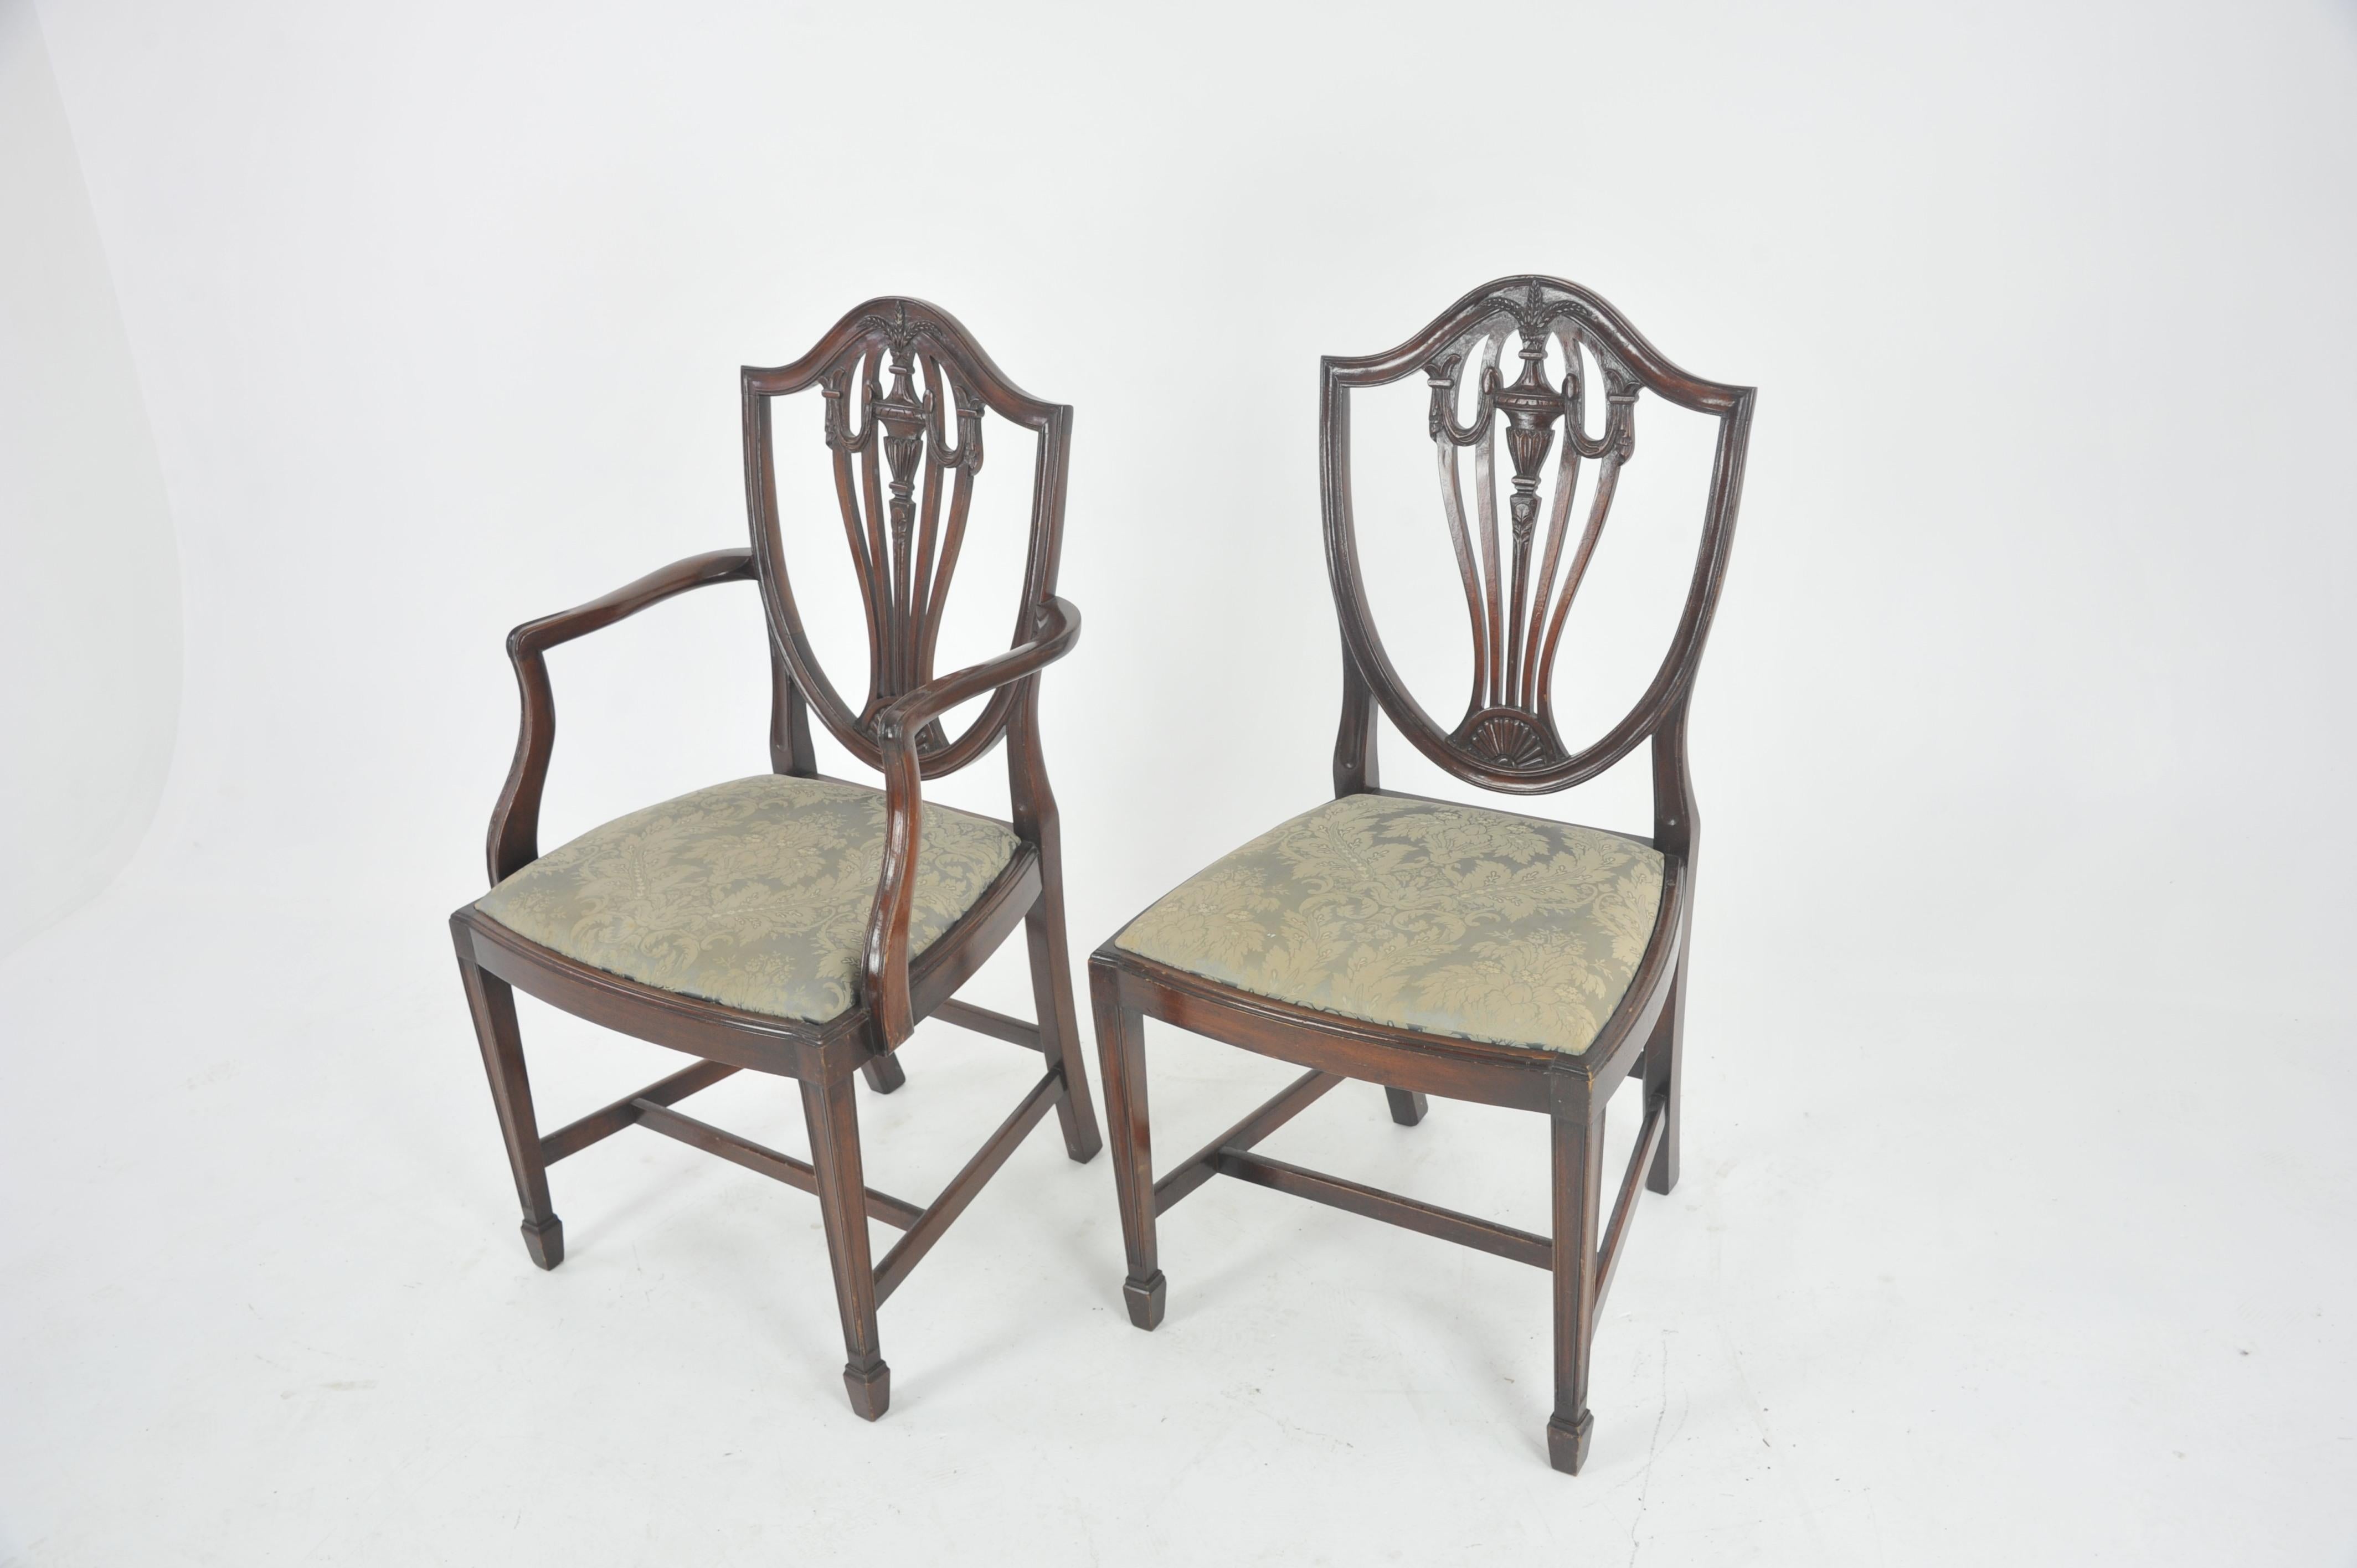 Twelve Dining Chairs, Antique Dining Chairs, Hepplewhite Chairs, Walnut, B1071 2